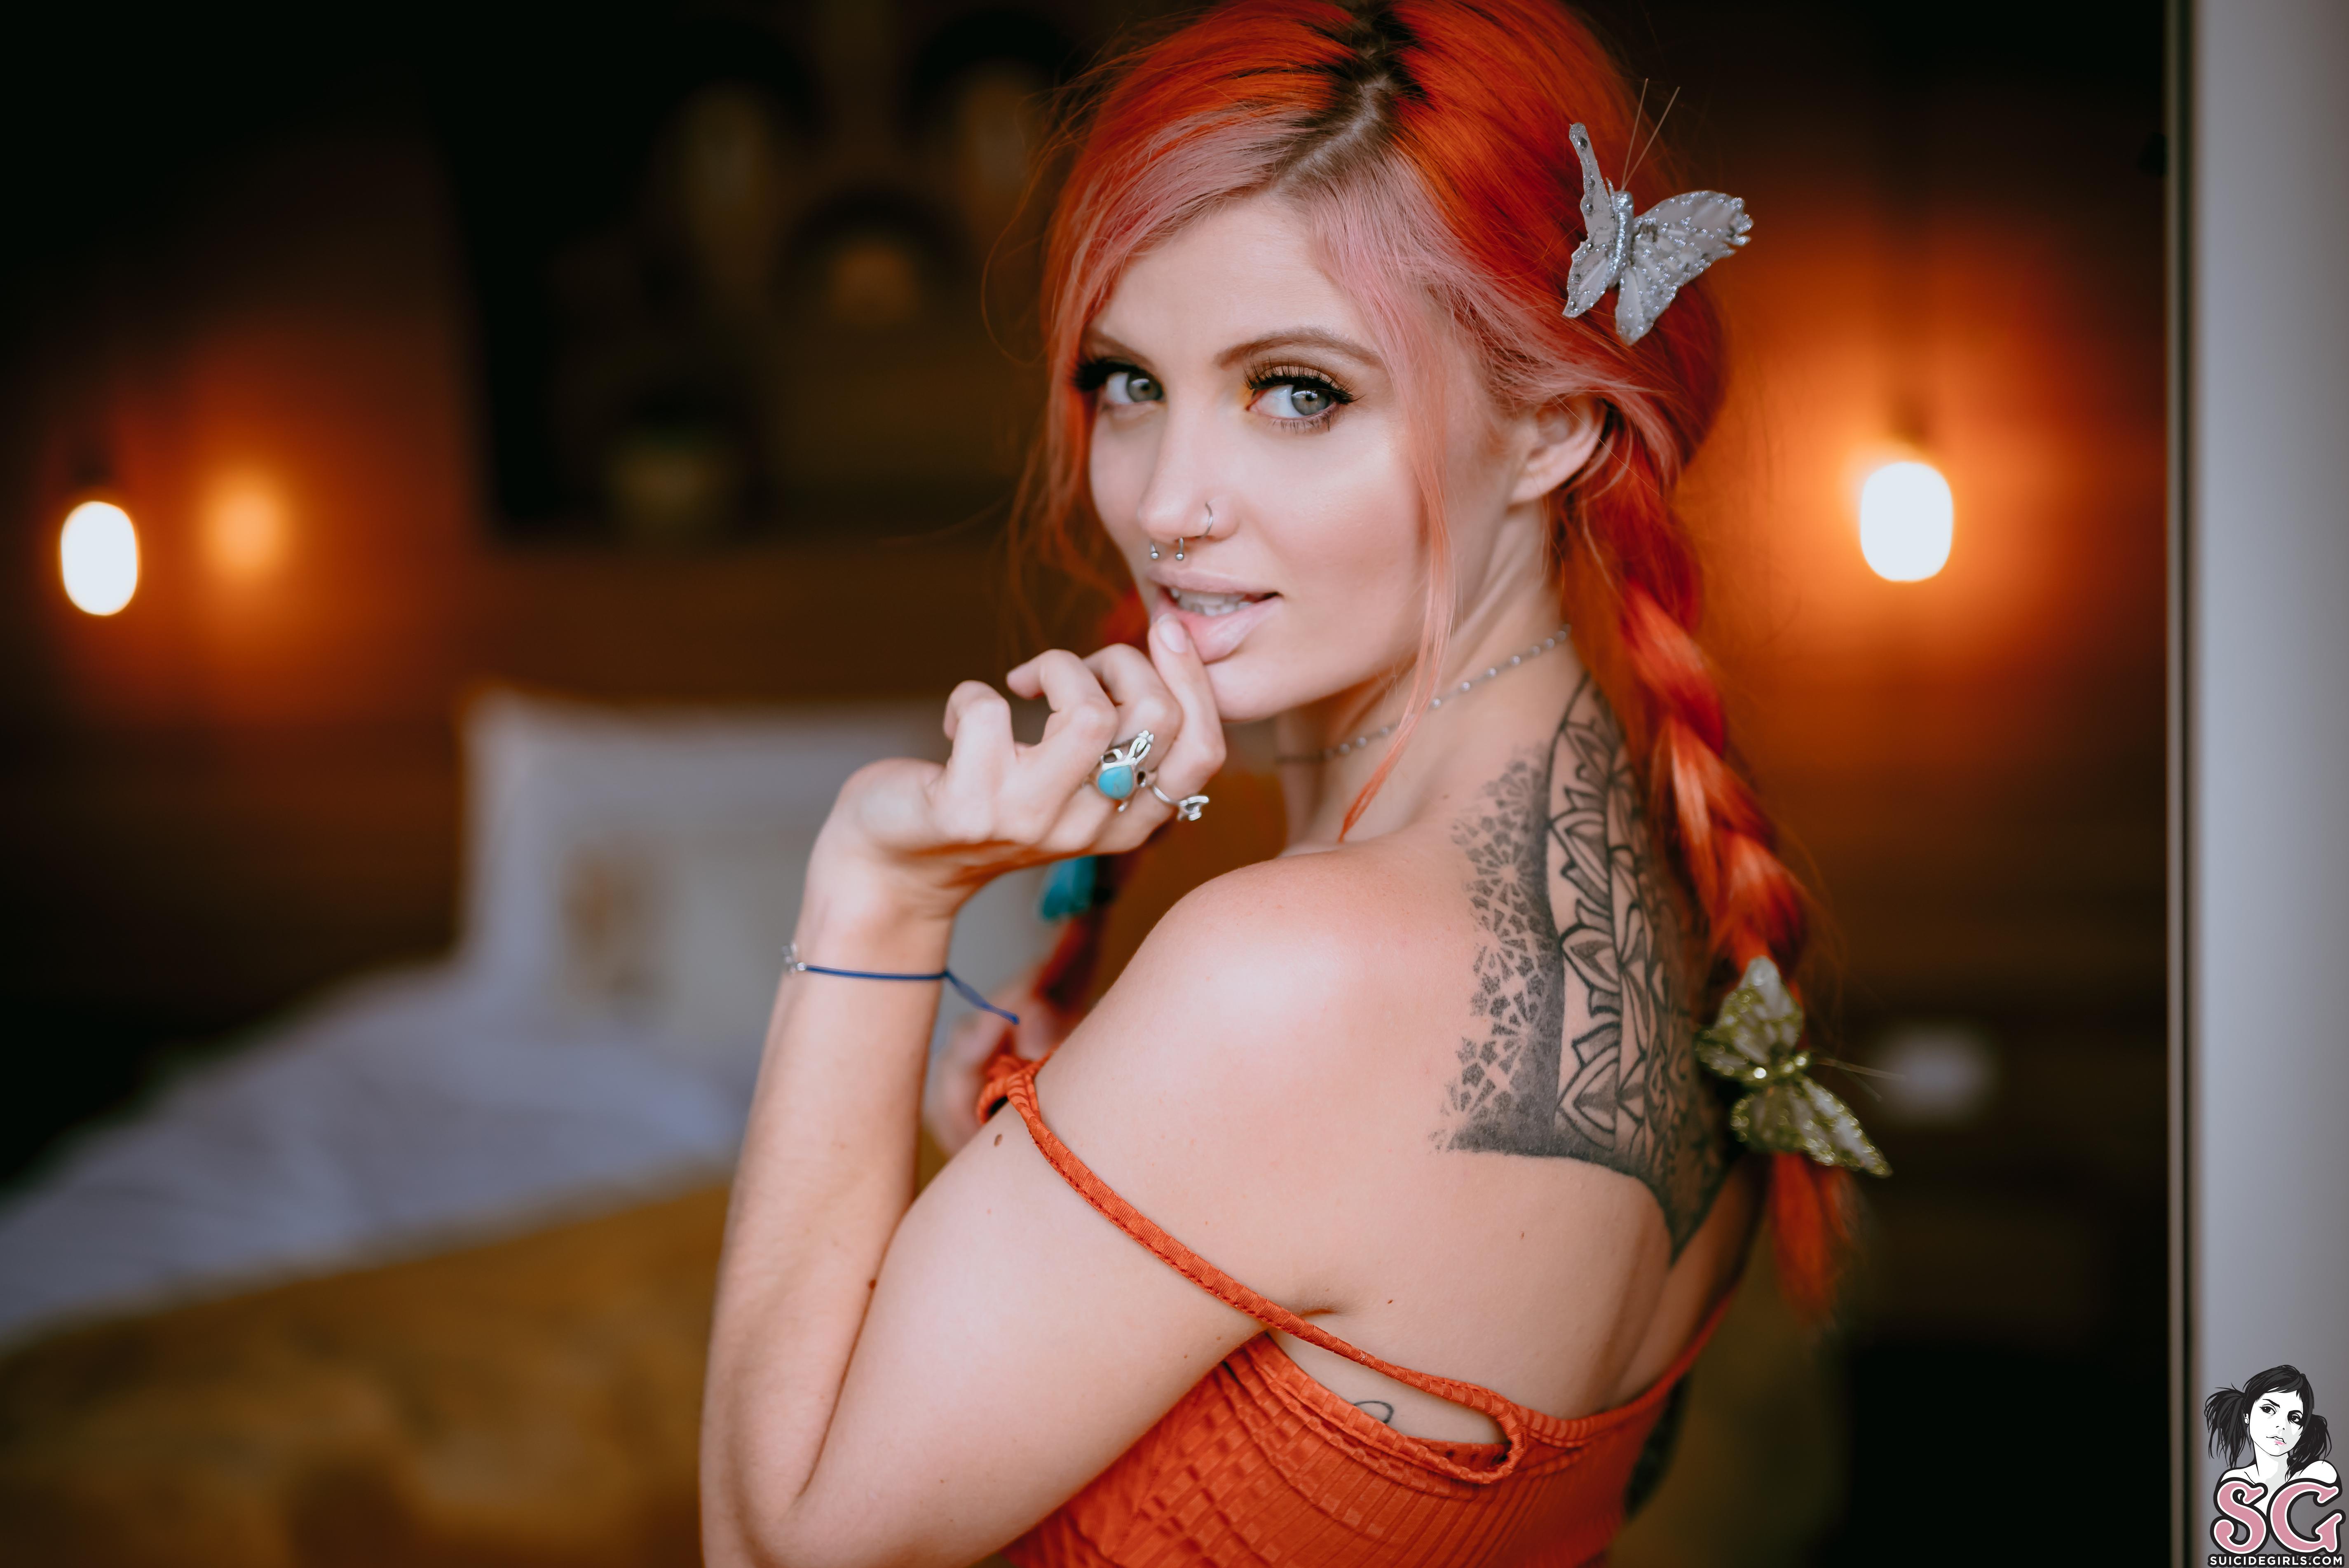 People 5700x3805 DollyD Suicide redhead Suicide Girls women dyed hair model...